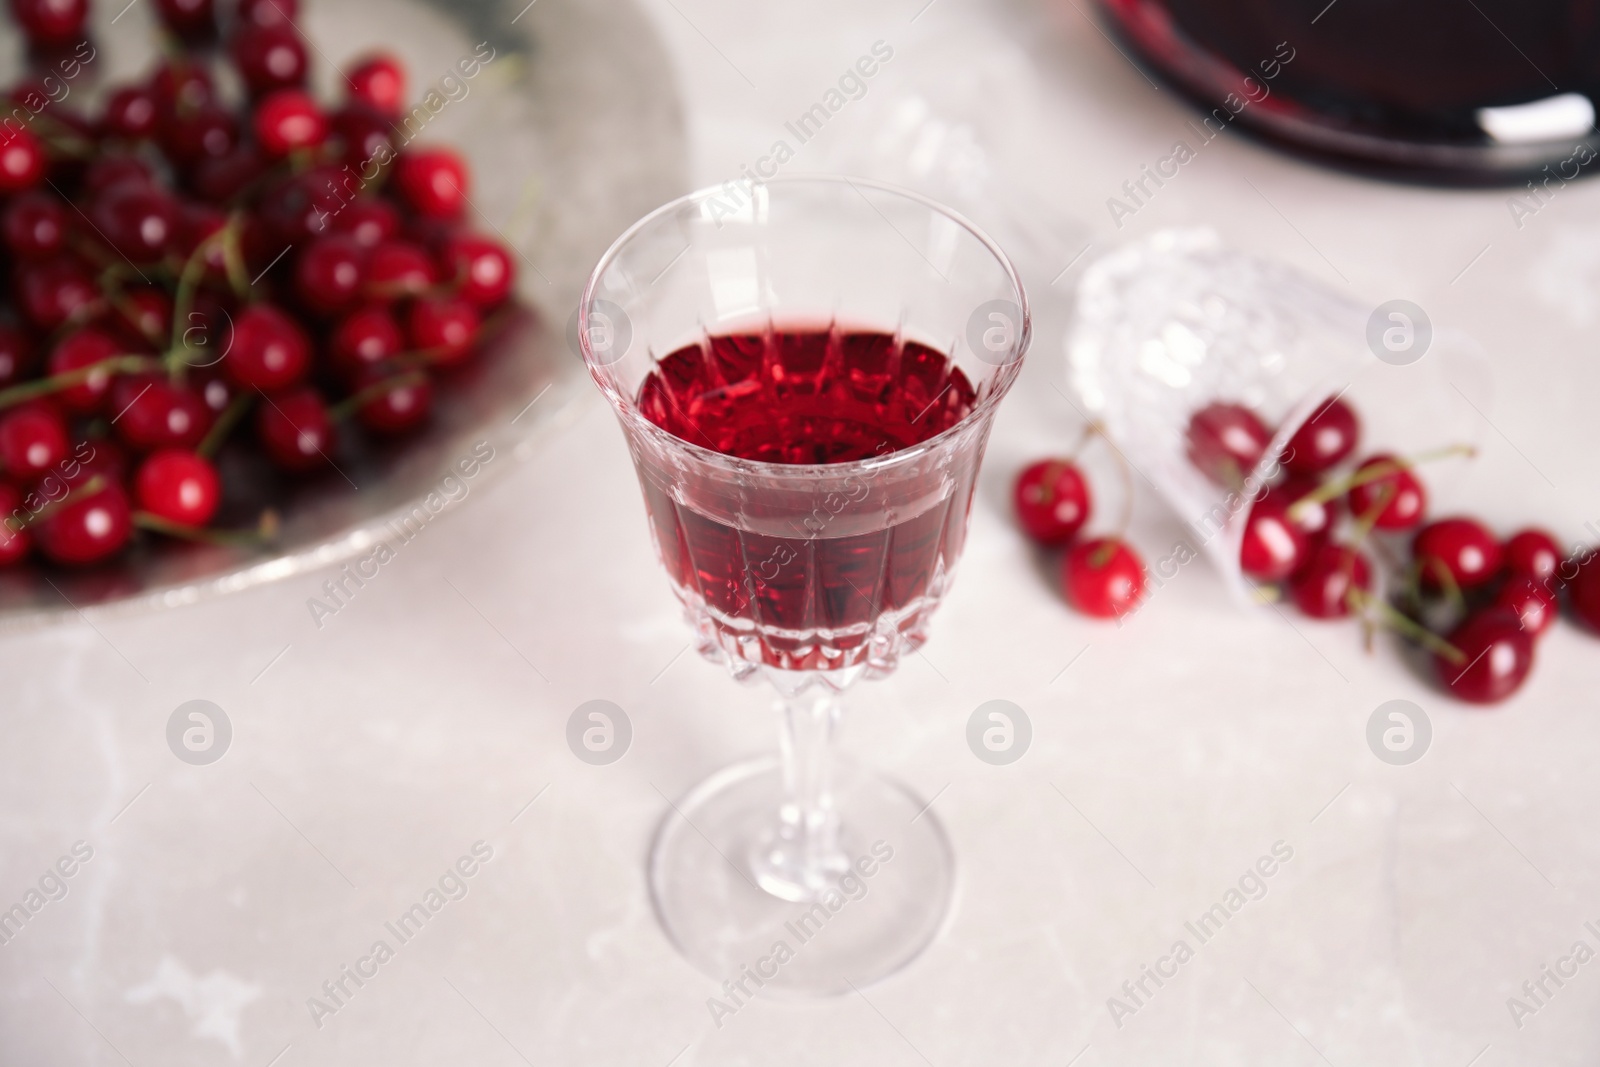 Photo of Delicious cherry wine and ripe juicy berries on white table